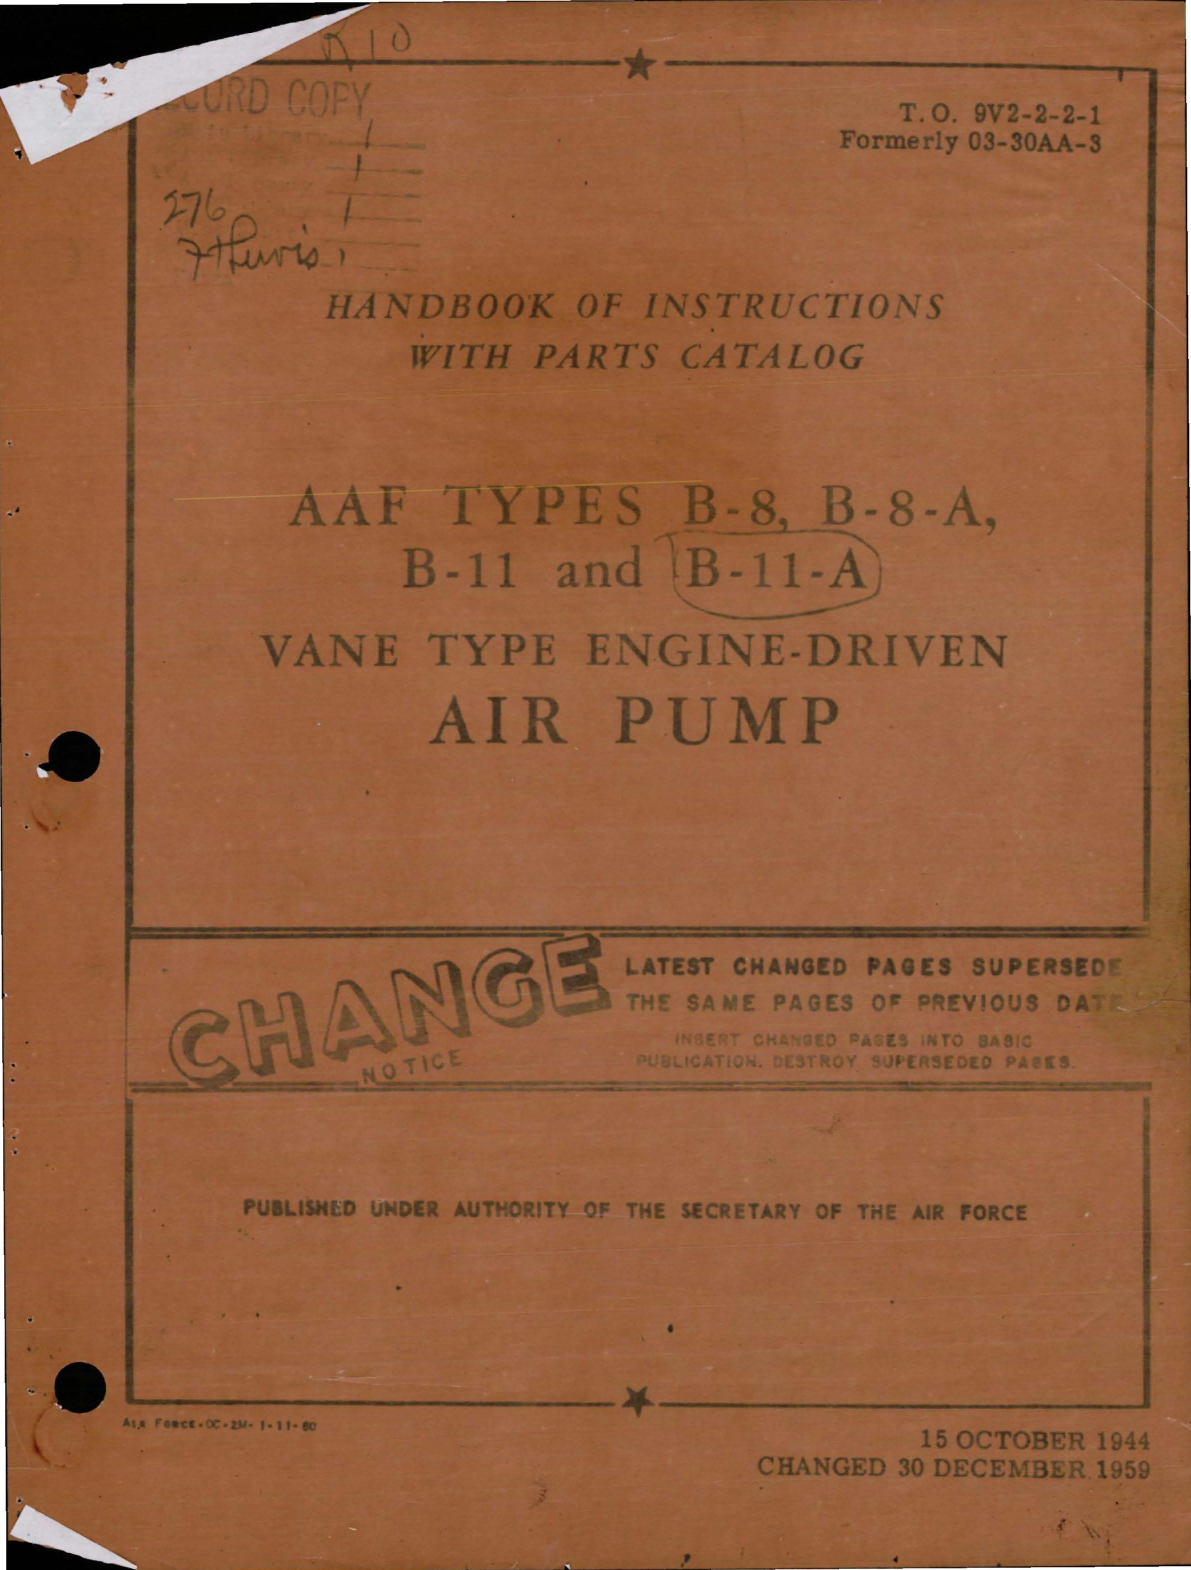 Sample page 1 from AirCorps Library document: Instructions with Parts Catalog for Vane Type Engine Driven Air Pump - Types B-8, B-8-A, B-11, and B-11-A